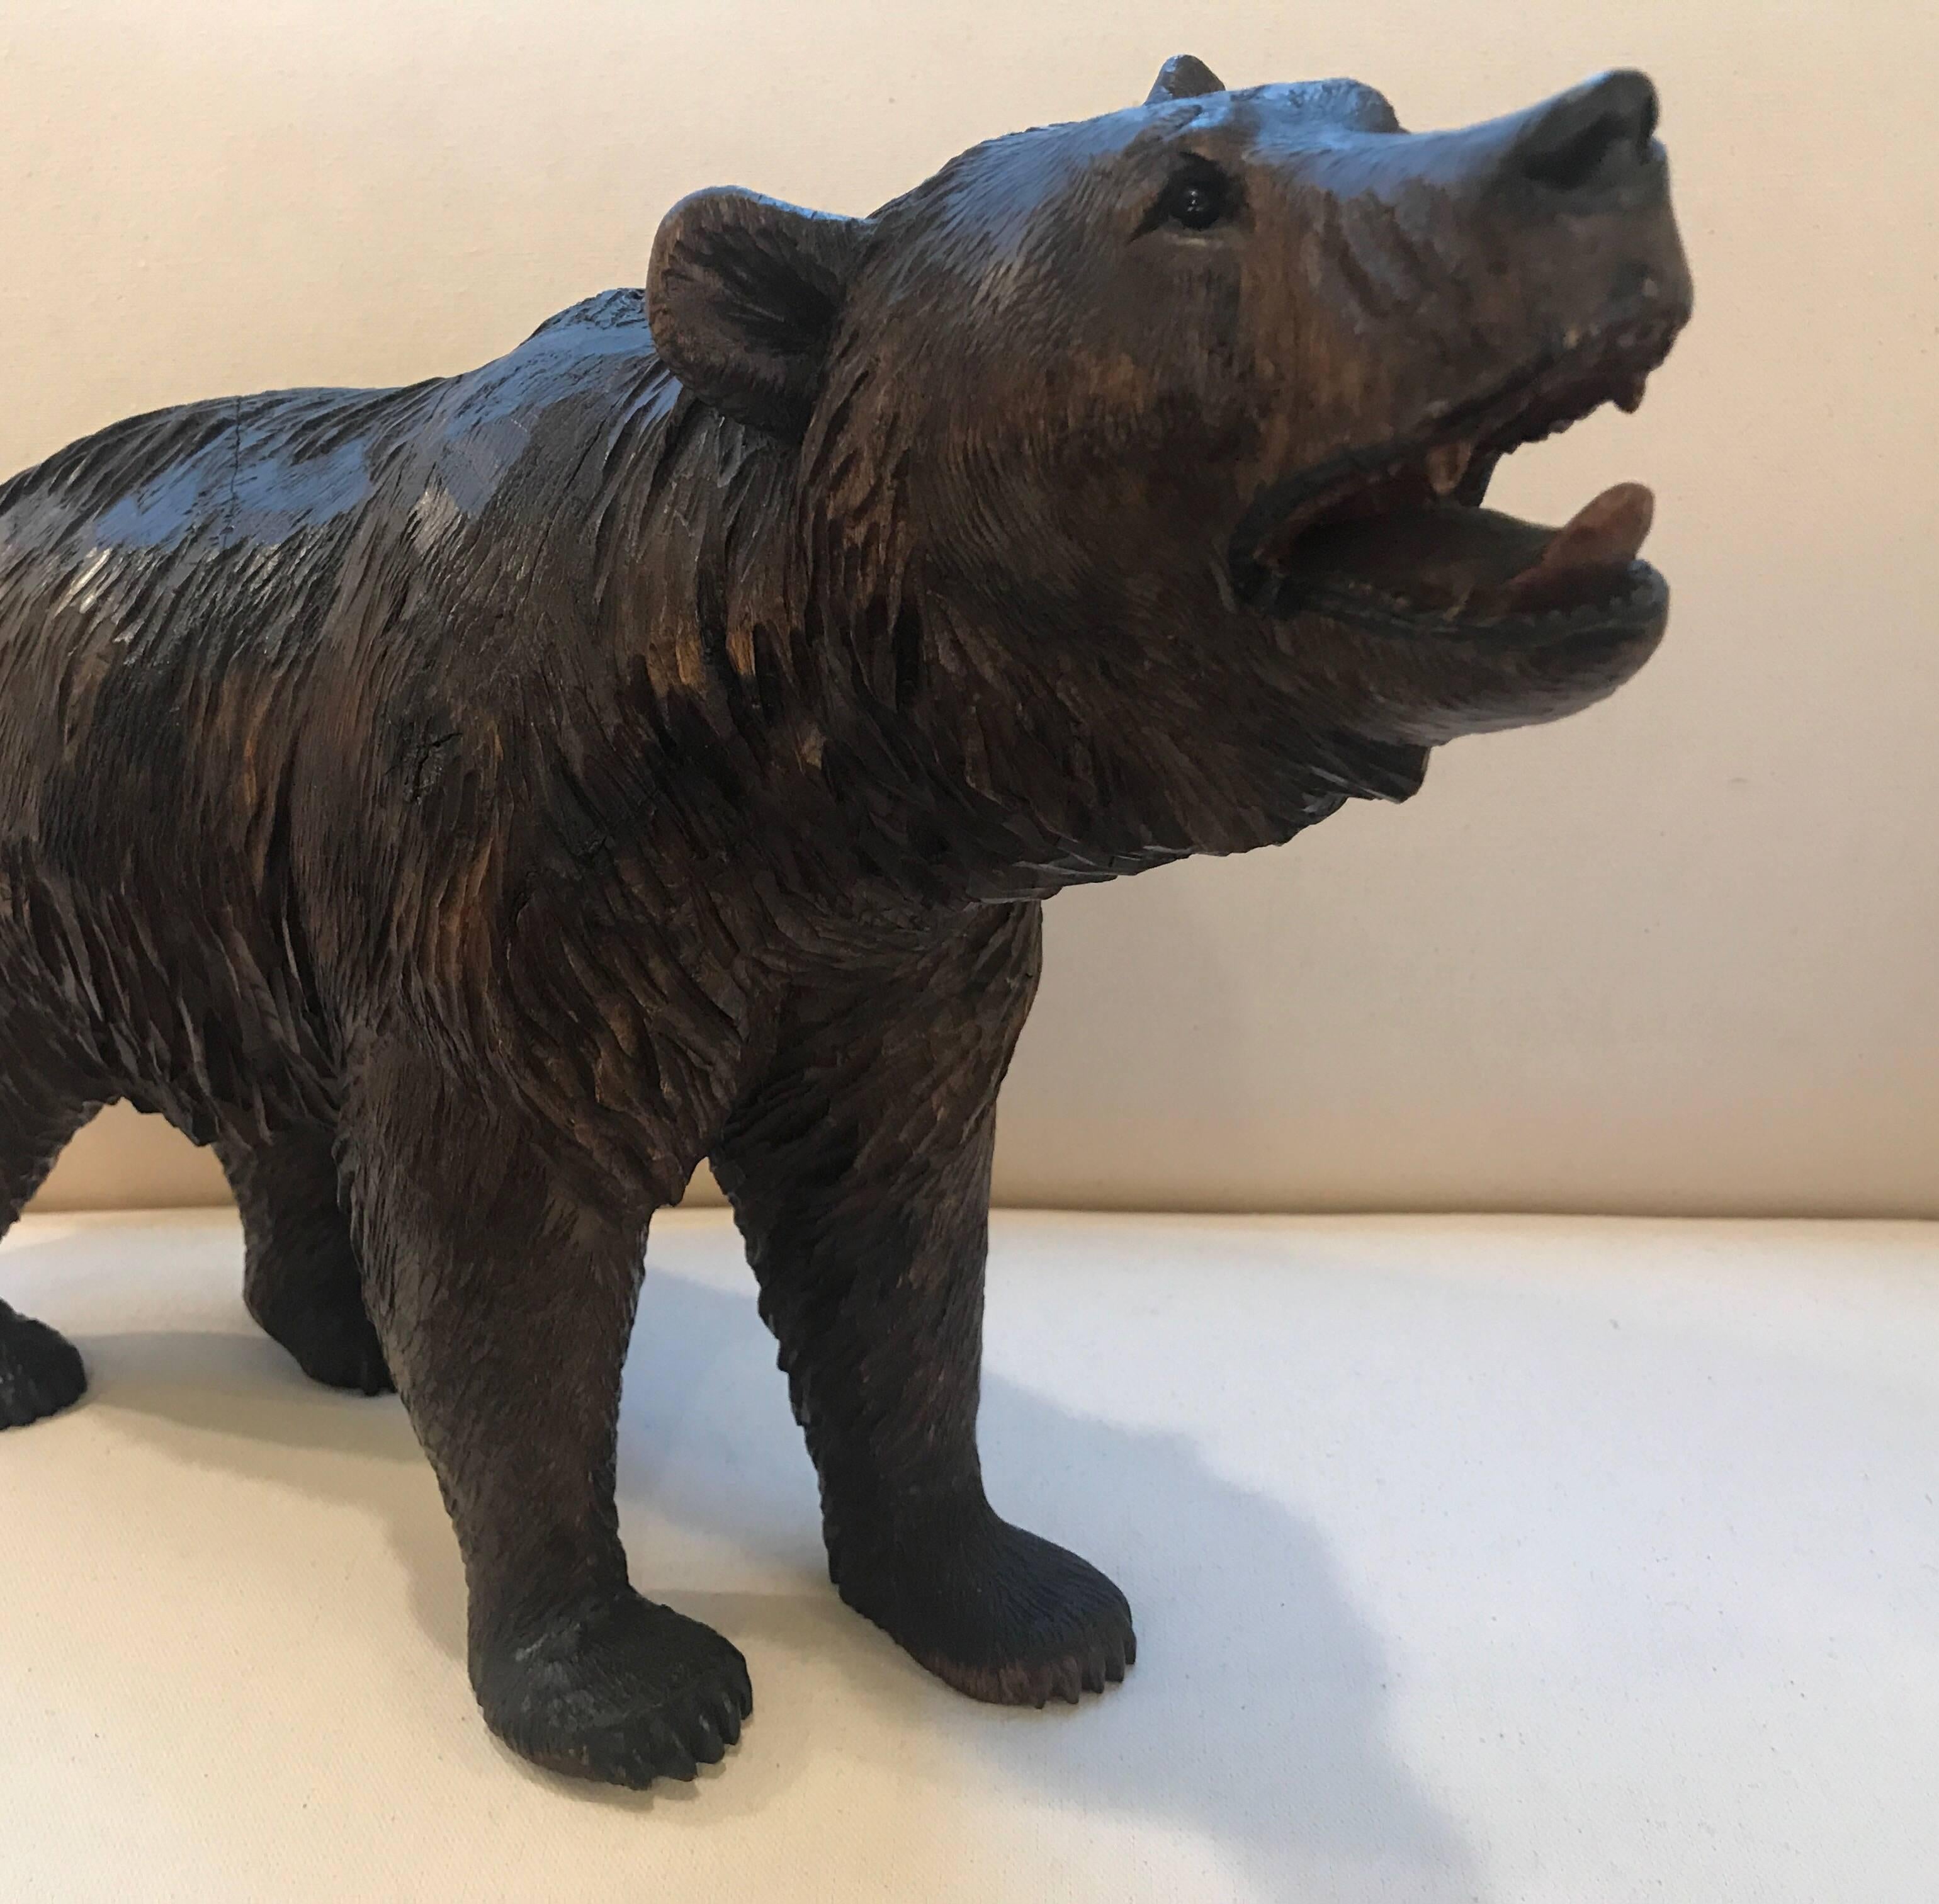 Exceptional walnut Black Forest carving of a bear. The fully hand carved figure with glass eyes, late 19th century.
This dark wood Black Forest carving features a bear on all four legs with his head turned and mouth open. This carved bear from the